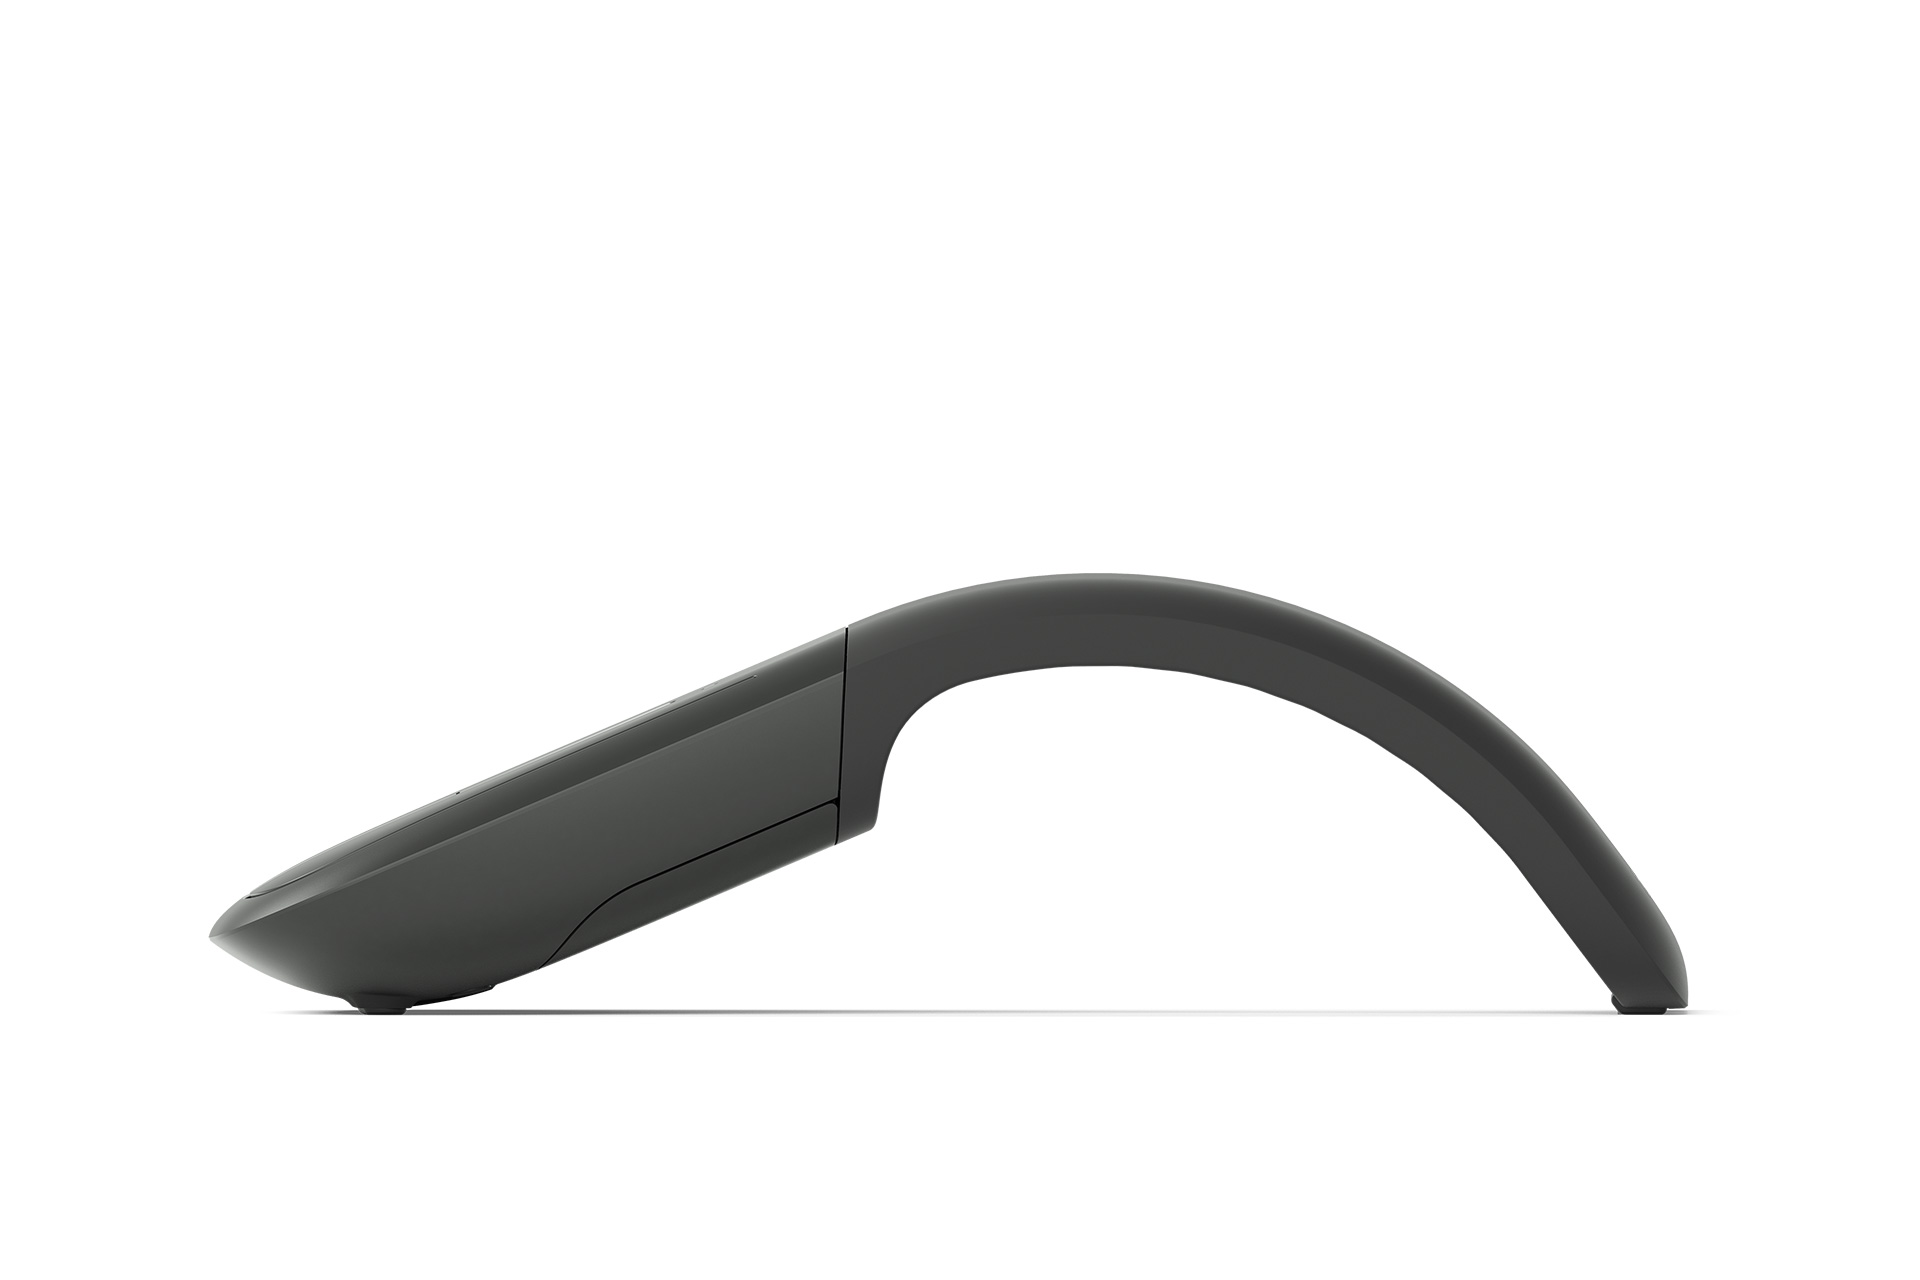 Microsoft Arc Touch Mouse render